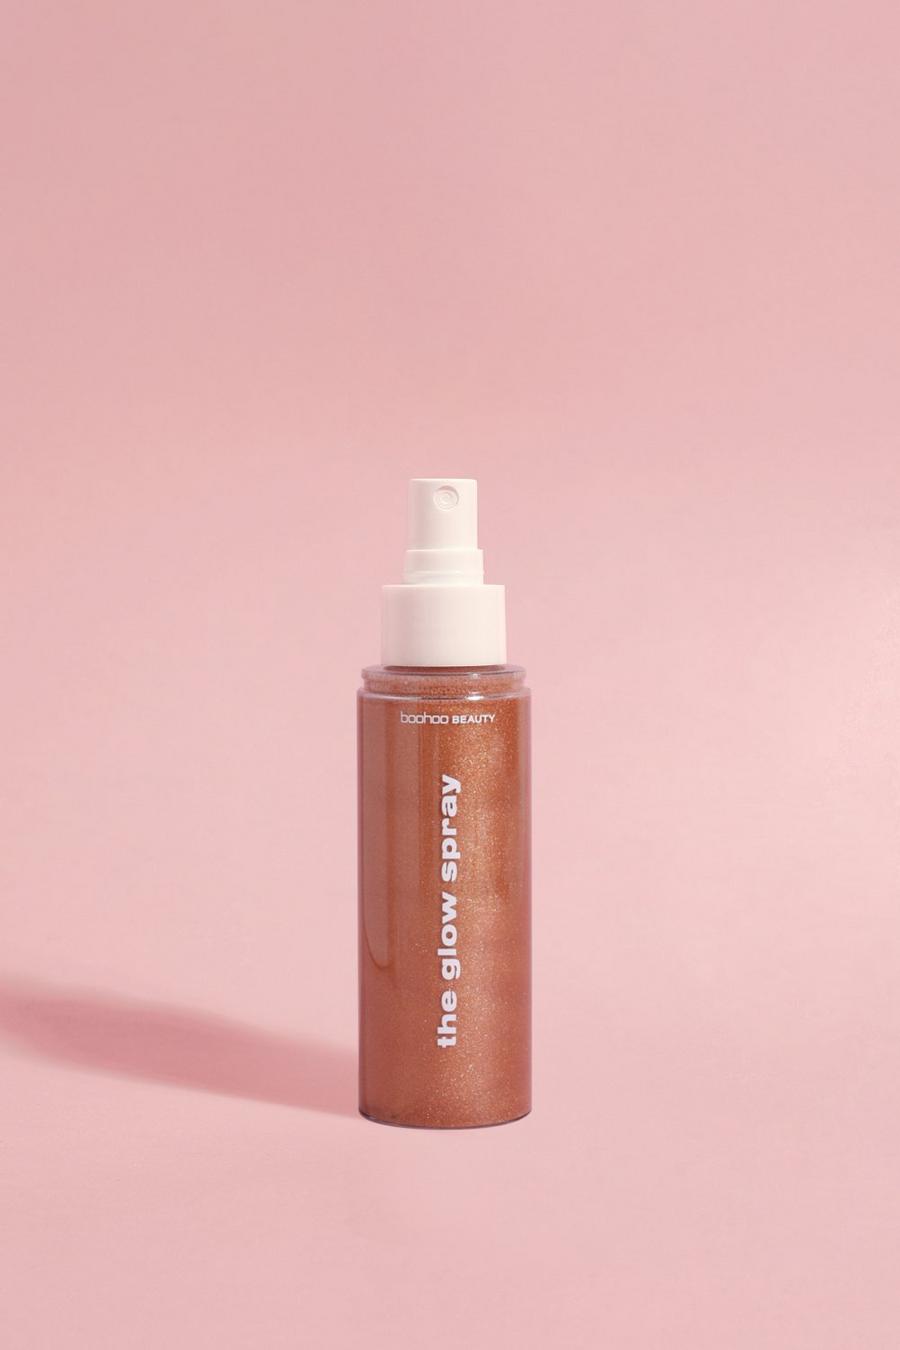 Boohoo Beauty - Mist fissante Ultra Glow, Rose gold metálicos